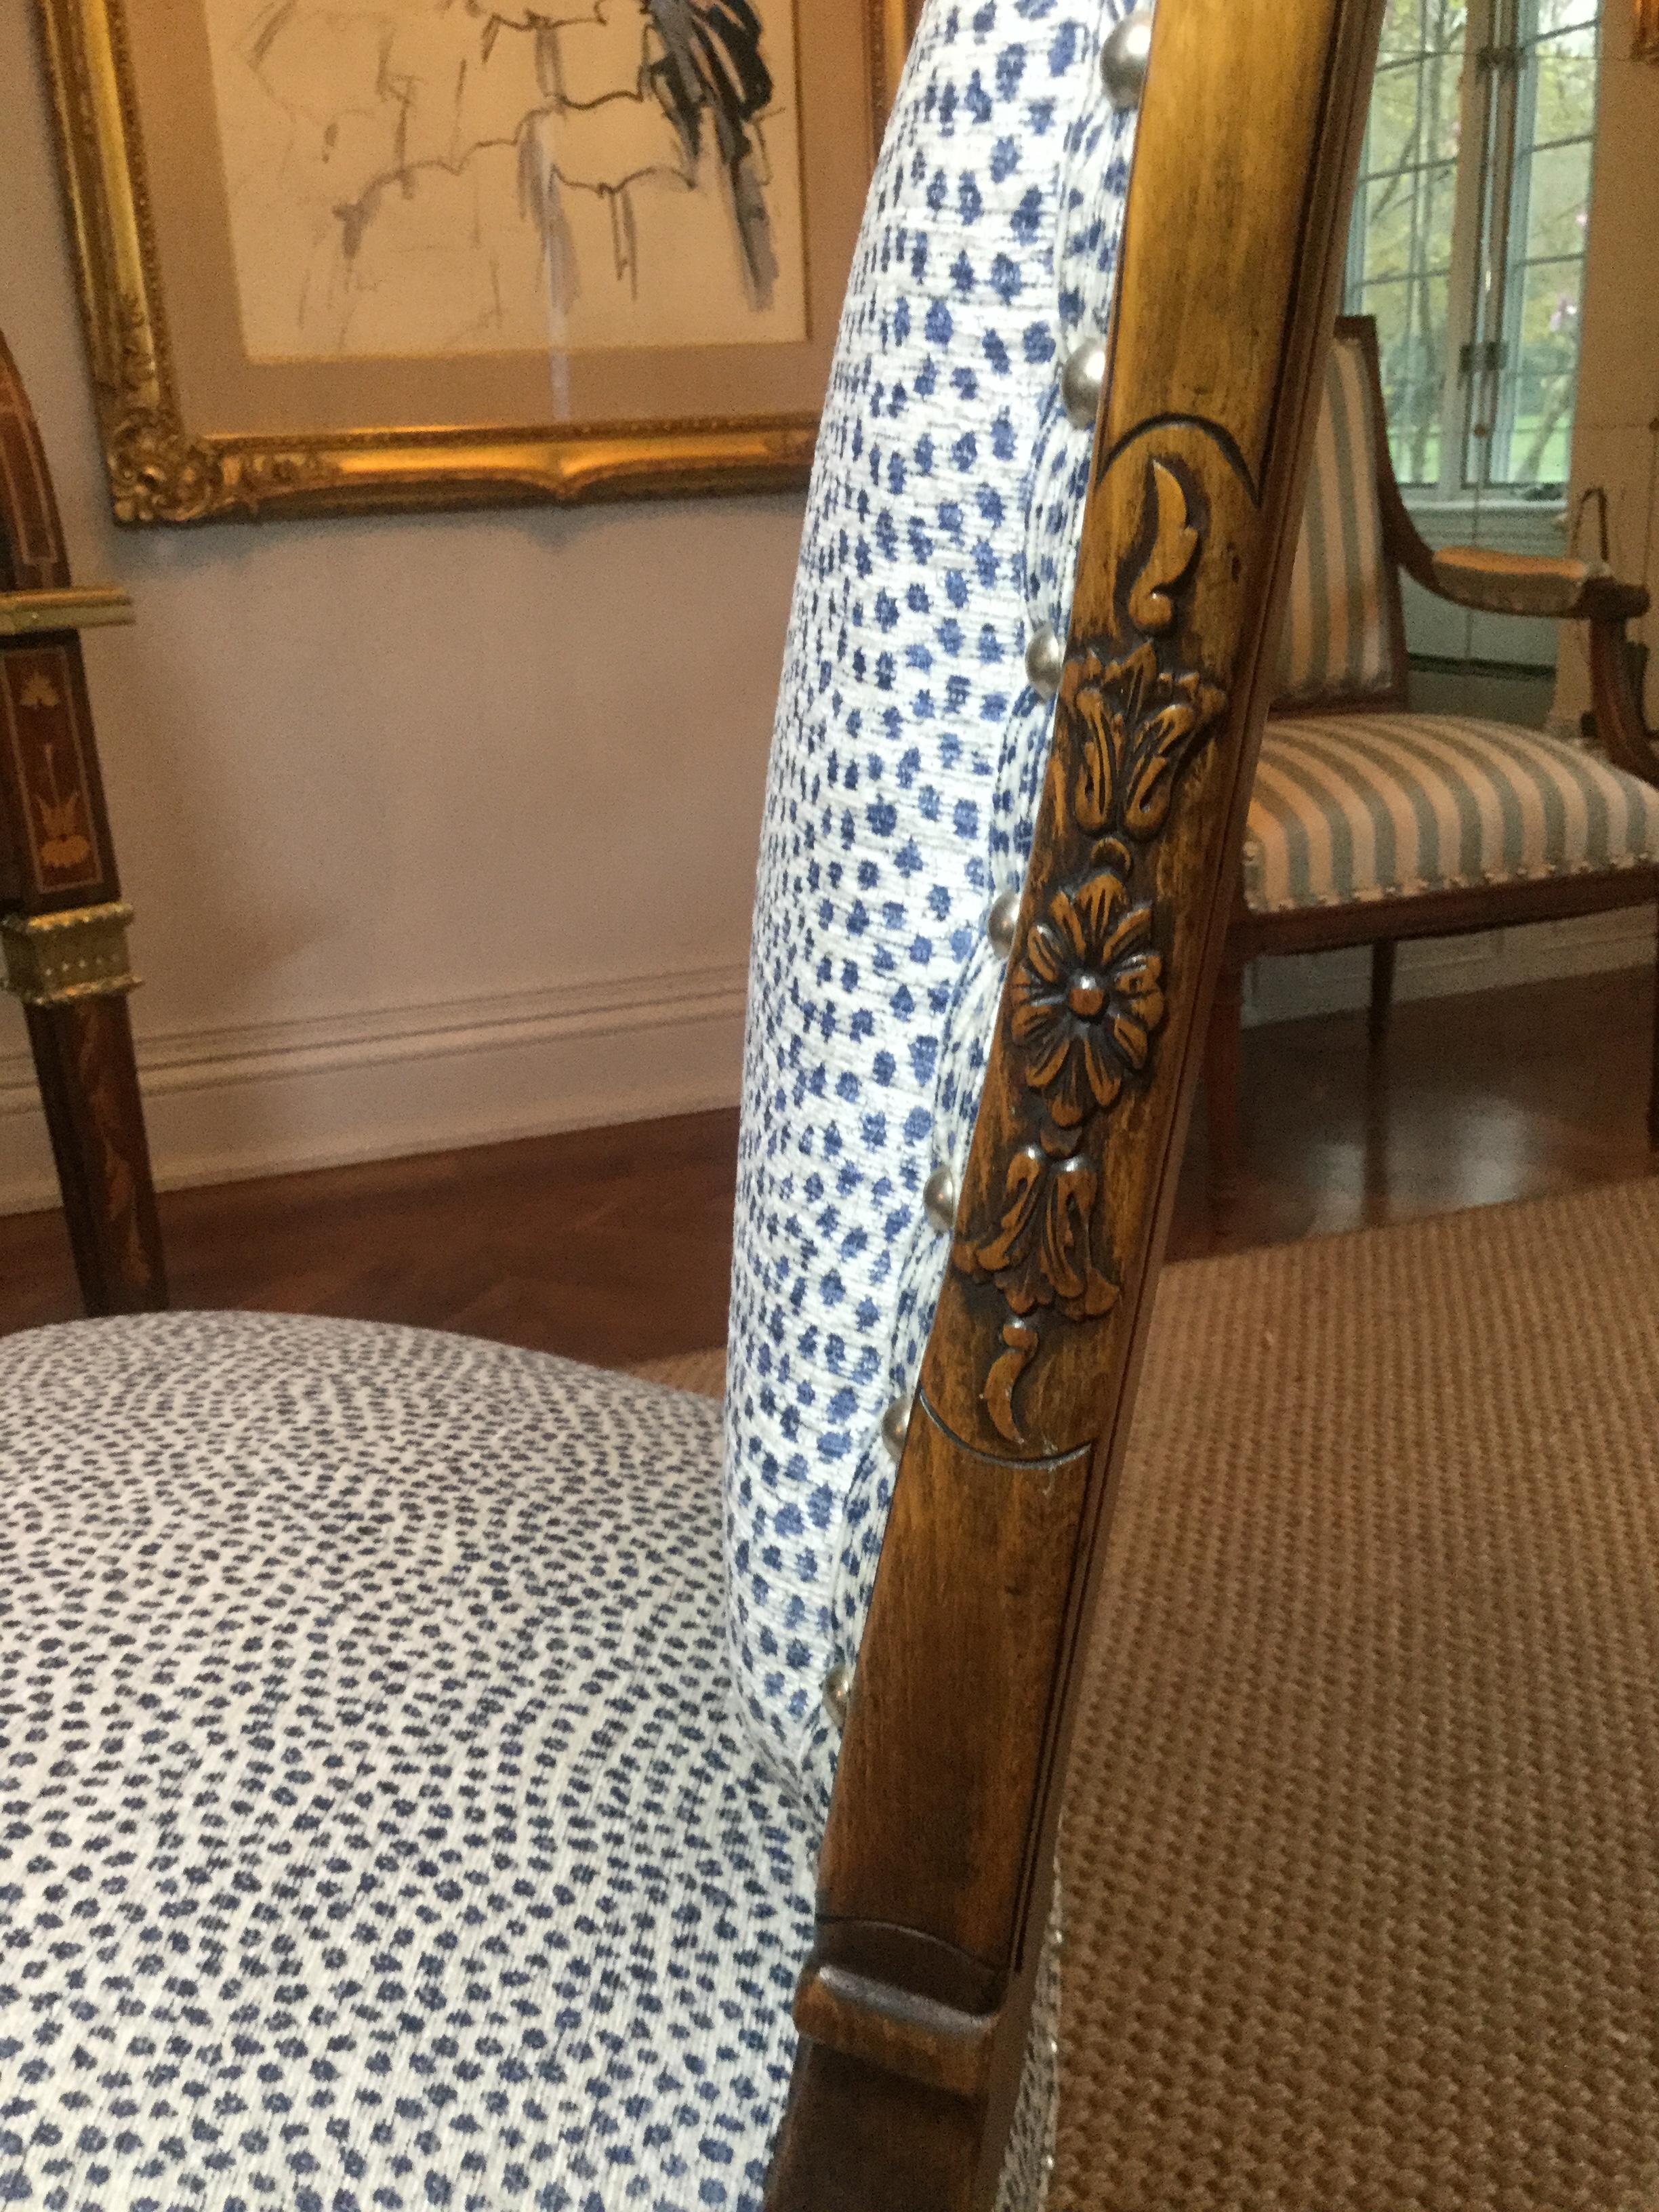 Pair of French Carved Walnut Side Chairs with Cheetah Blue and White Upholstery For Sale 3